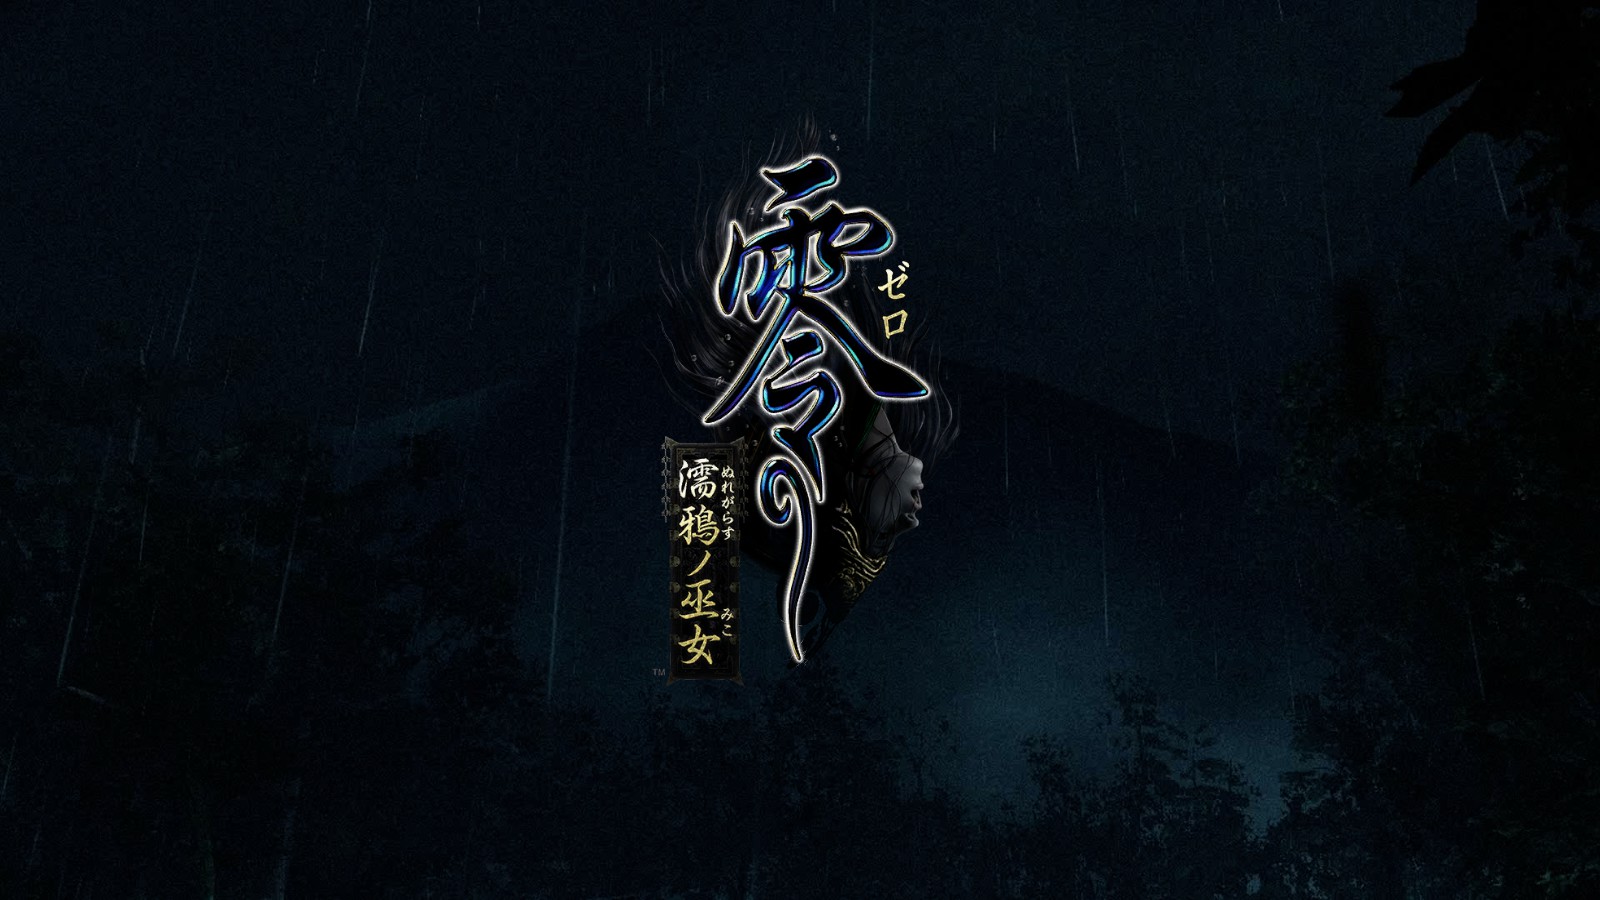 How To Change the Title Card from Project Zero to Fatal Frame (and vice versa) image 58